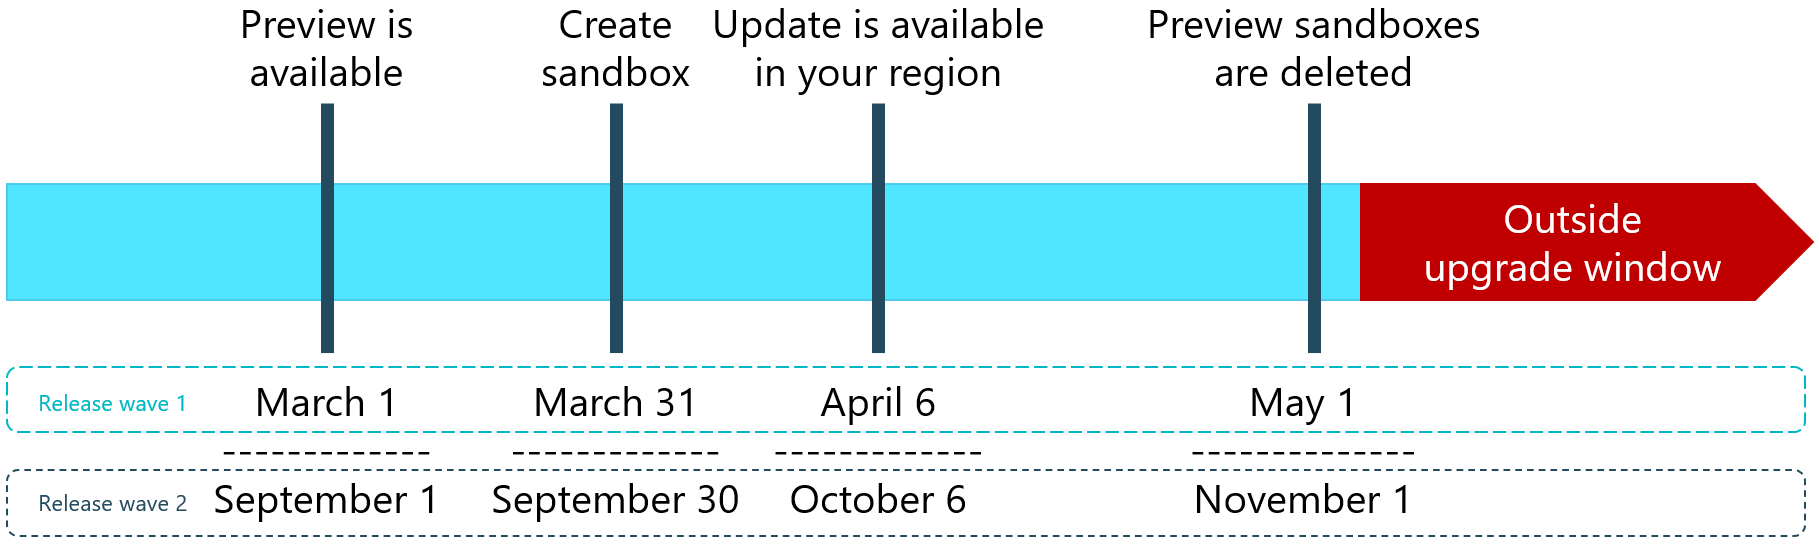 Rollout timeline example for 2022 release ware 1 and 2